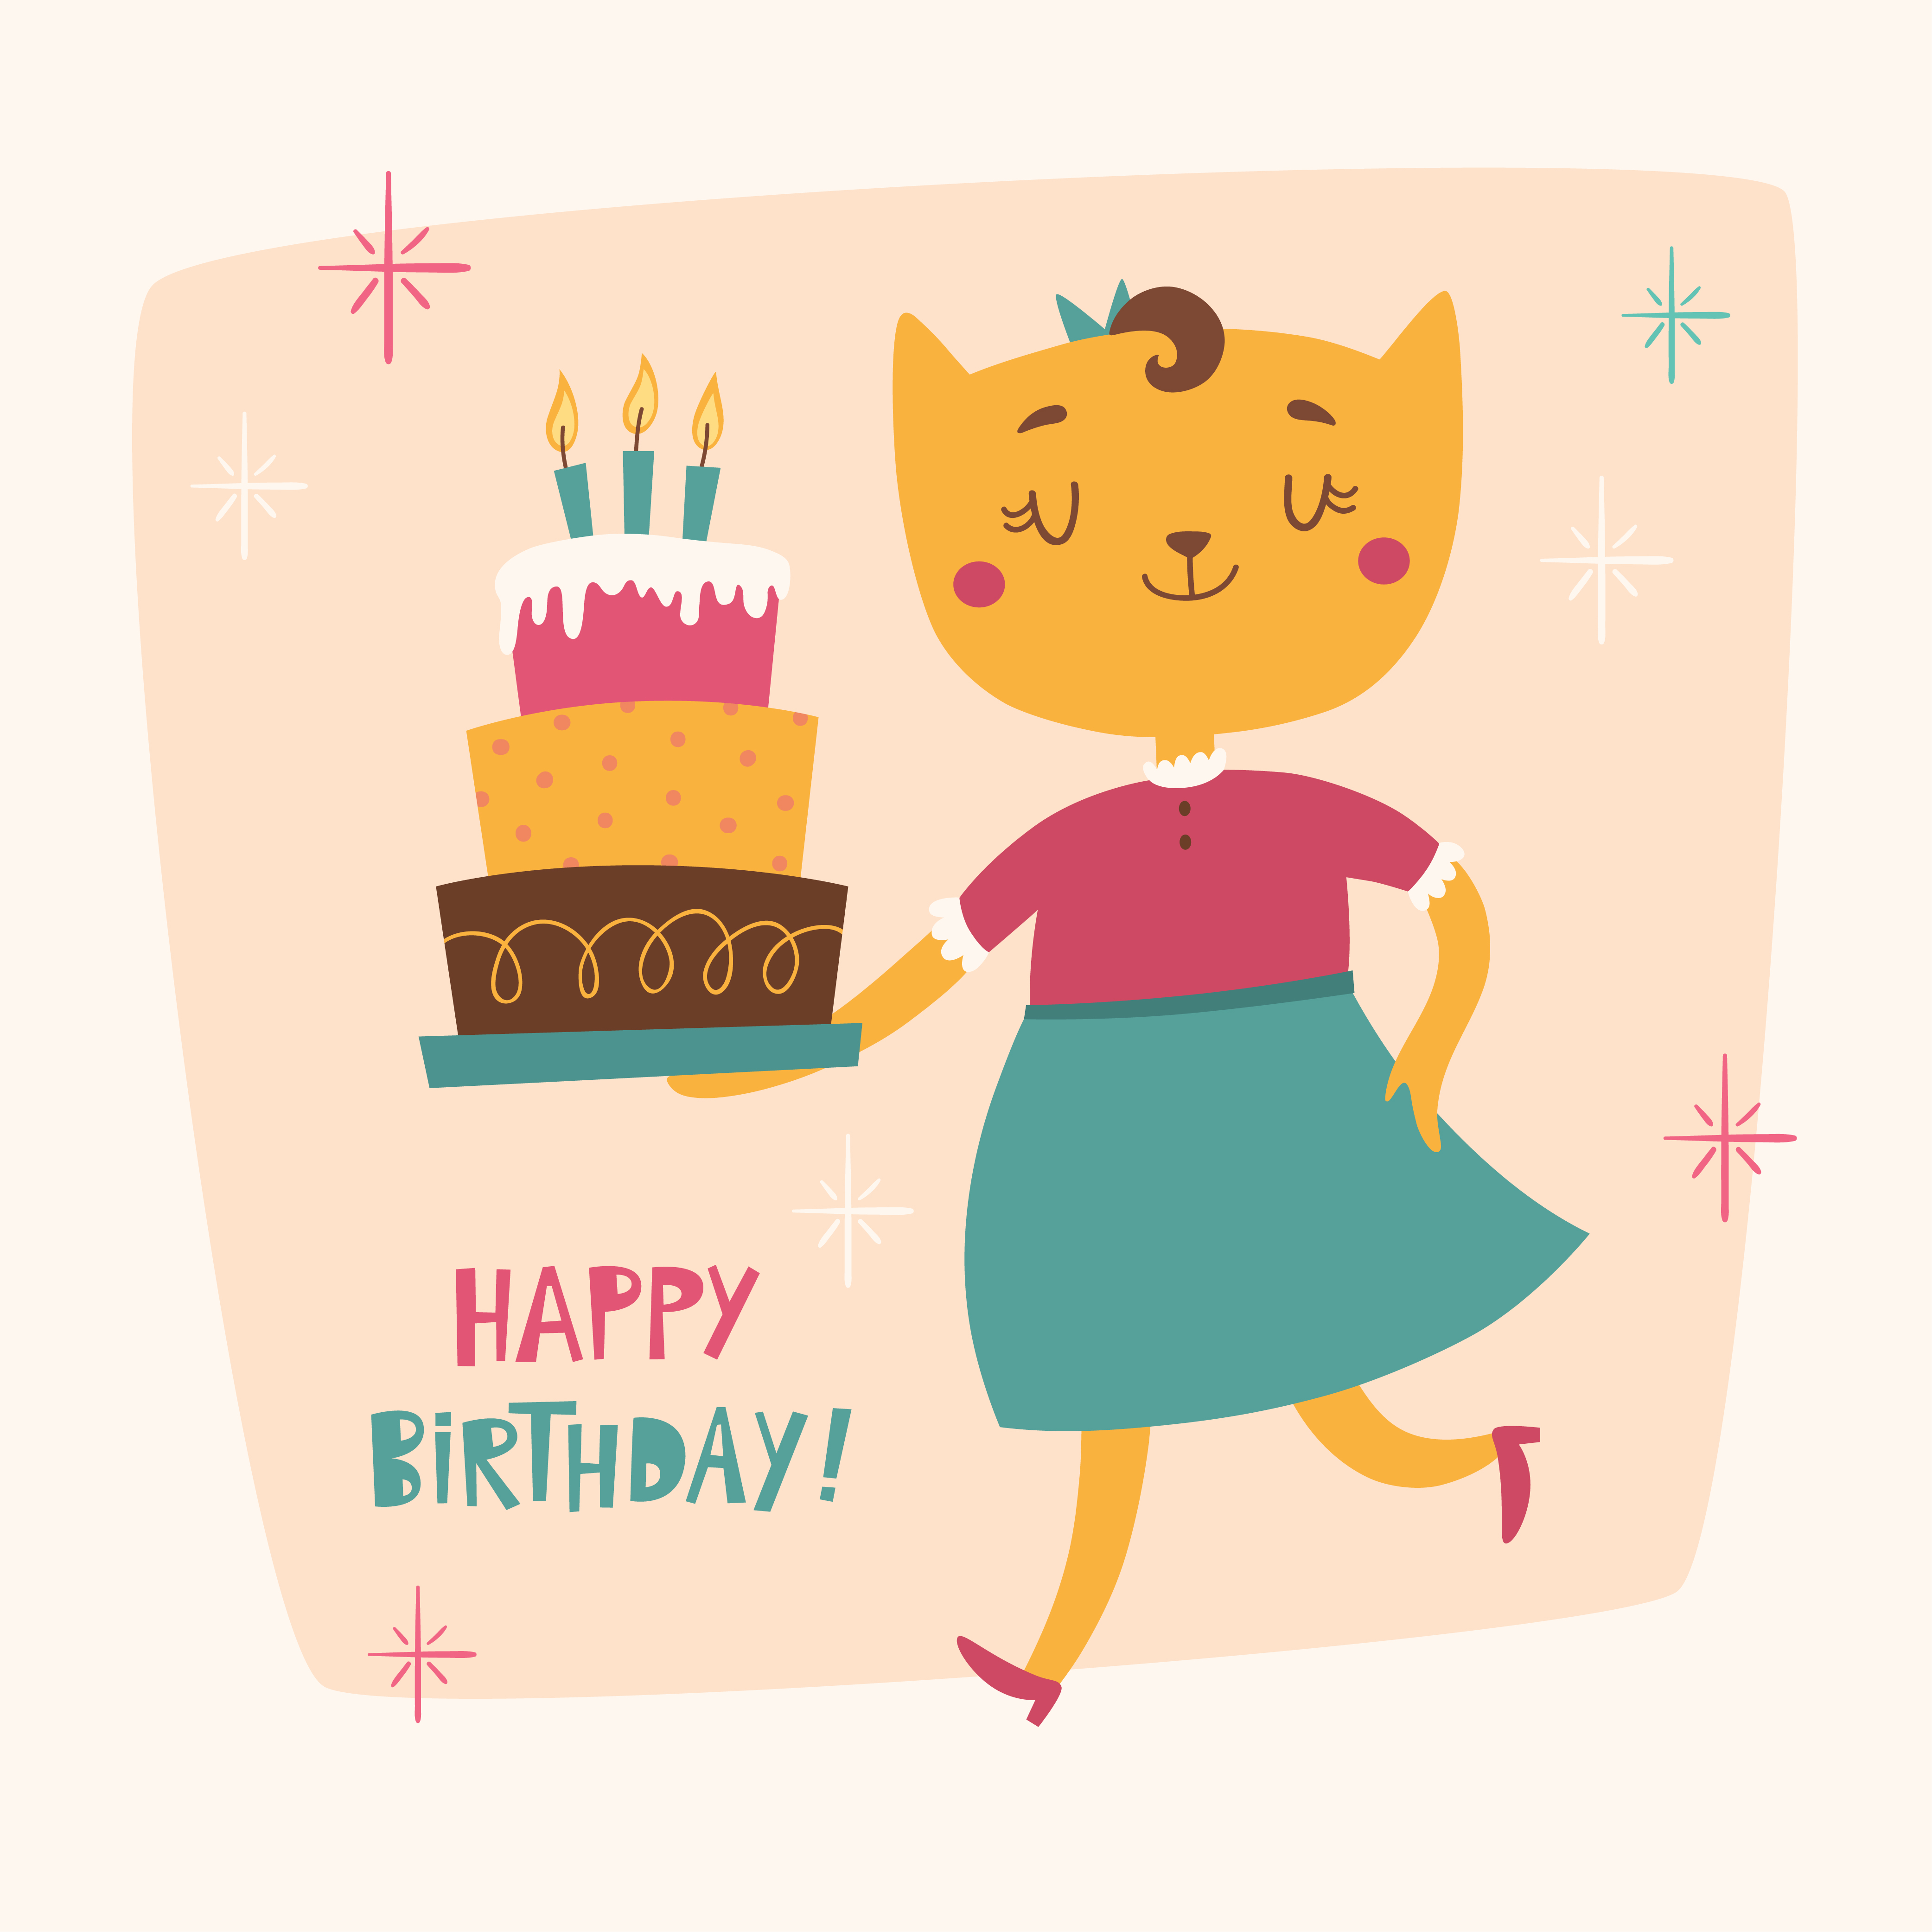 Happy Birthday card with cute cat Photoshop brush